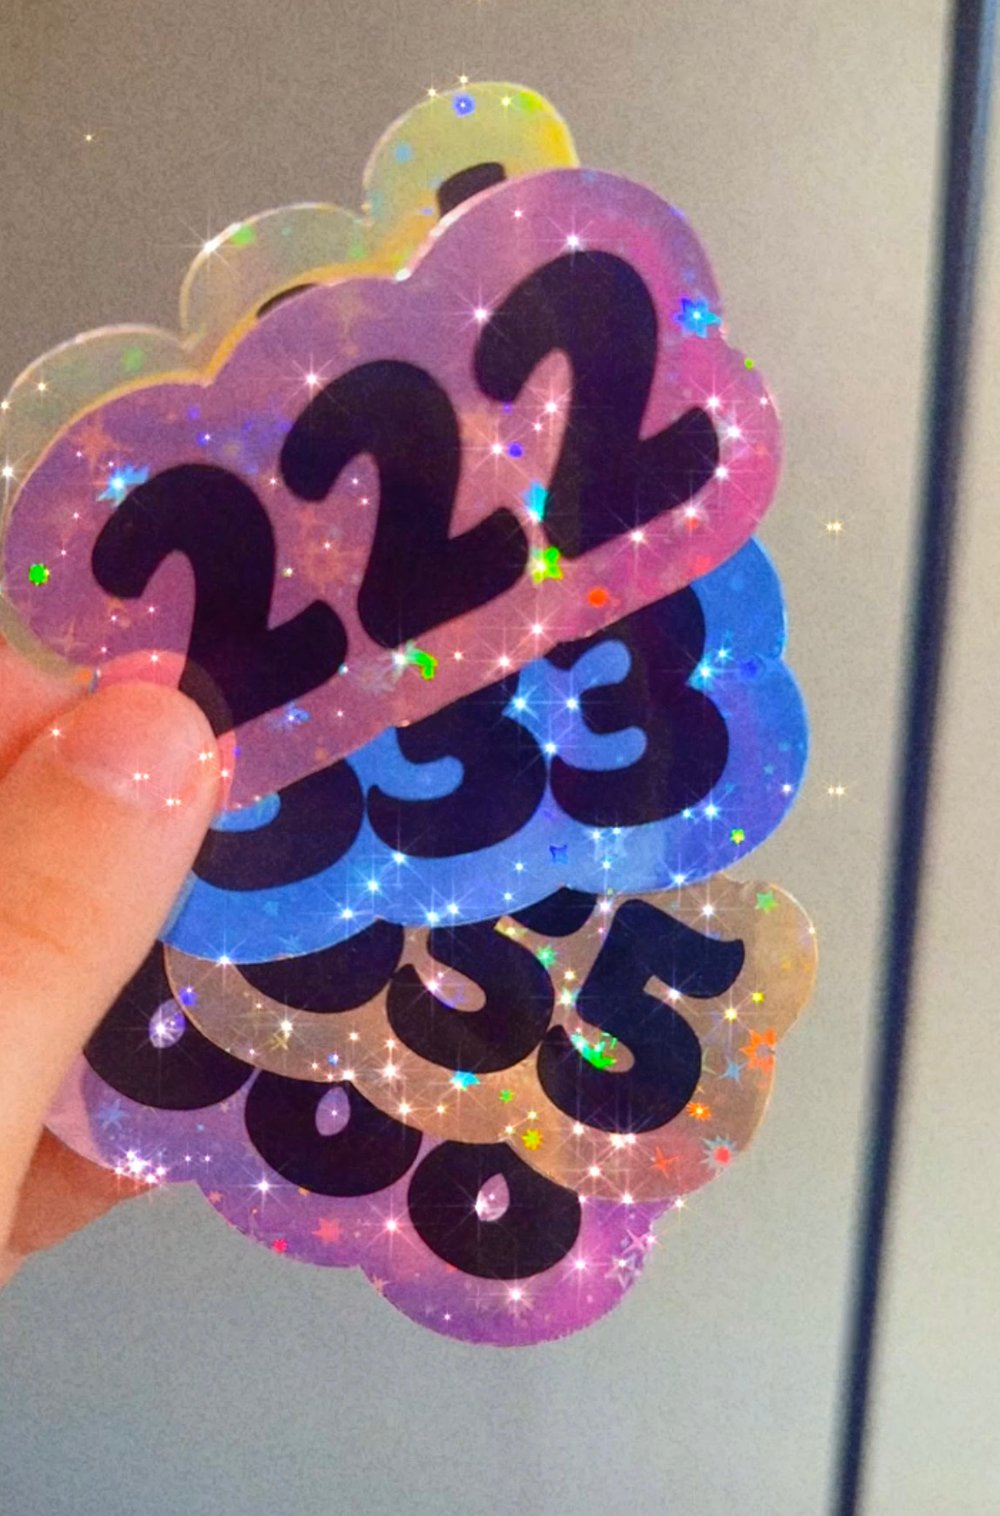 Angel number holographic stickers 